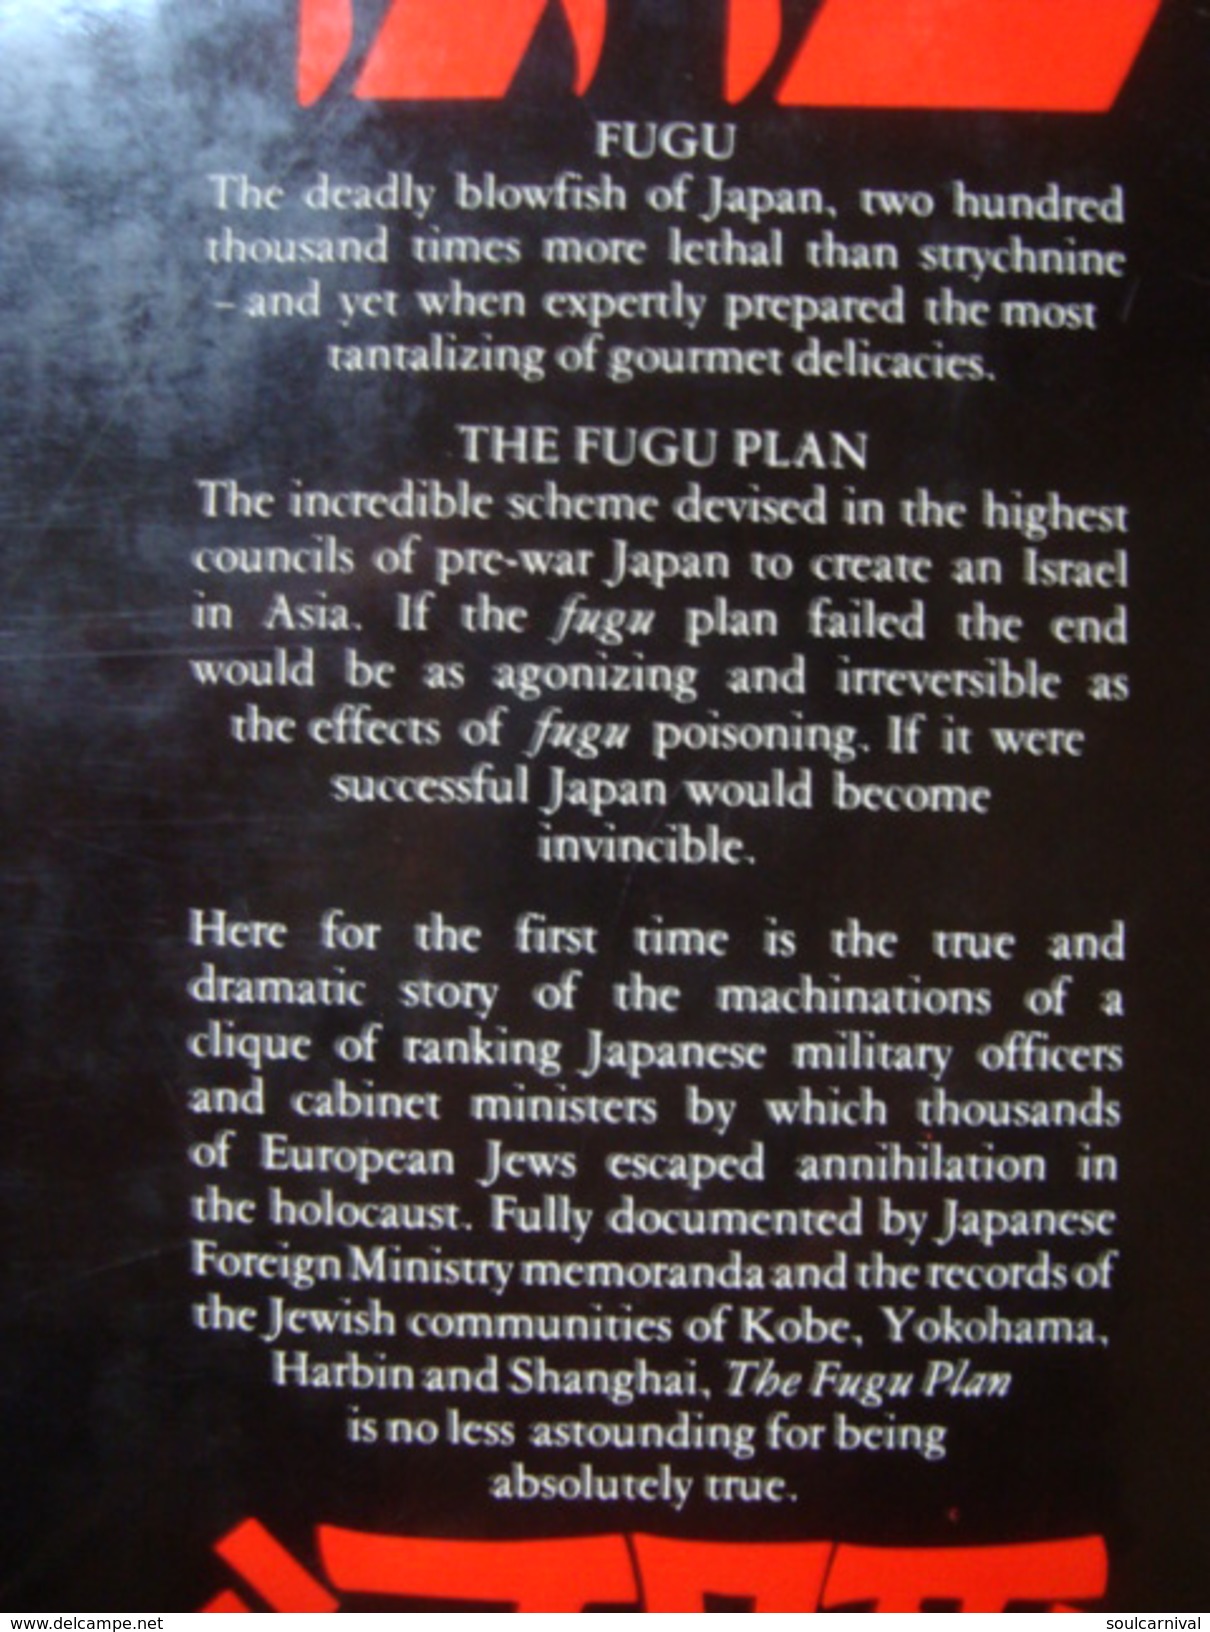 THE FUGU PLAN. THE UNTOLD STORY OF THE JAPANESE AND THE JEWS DURING WORLD WAR II - TOKAYER SWARTZ (1979). WWII - Asiática